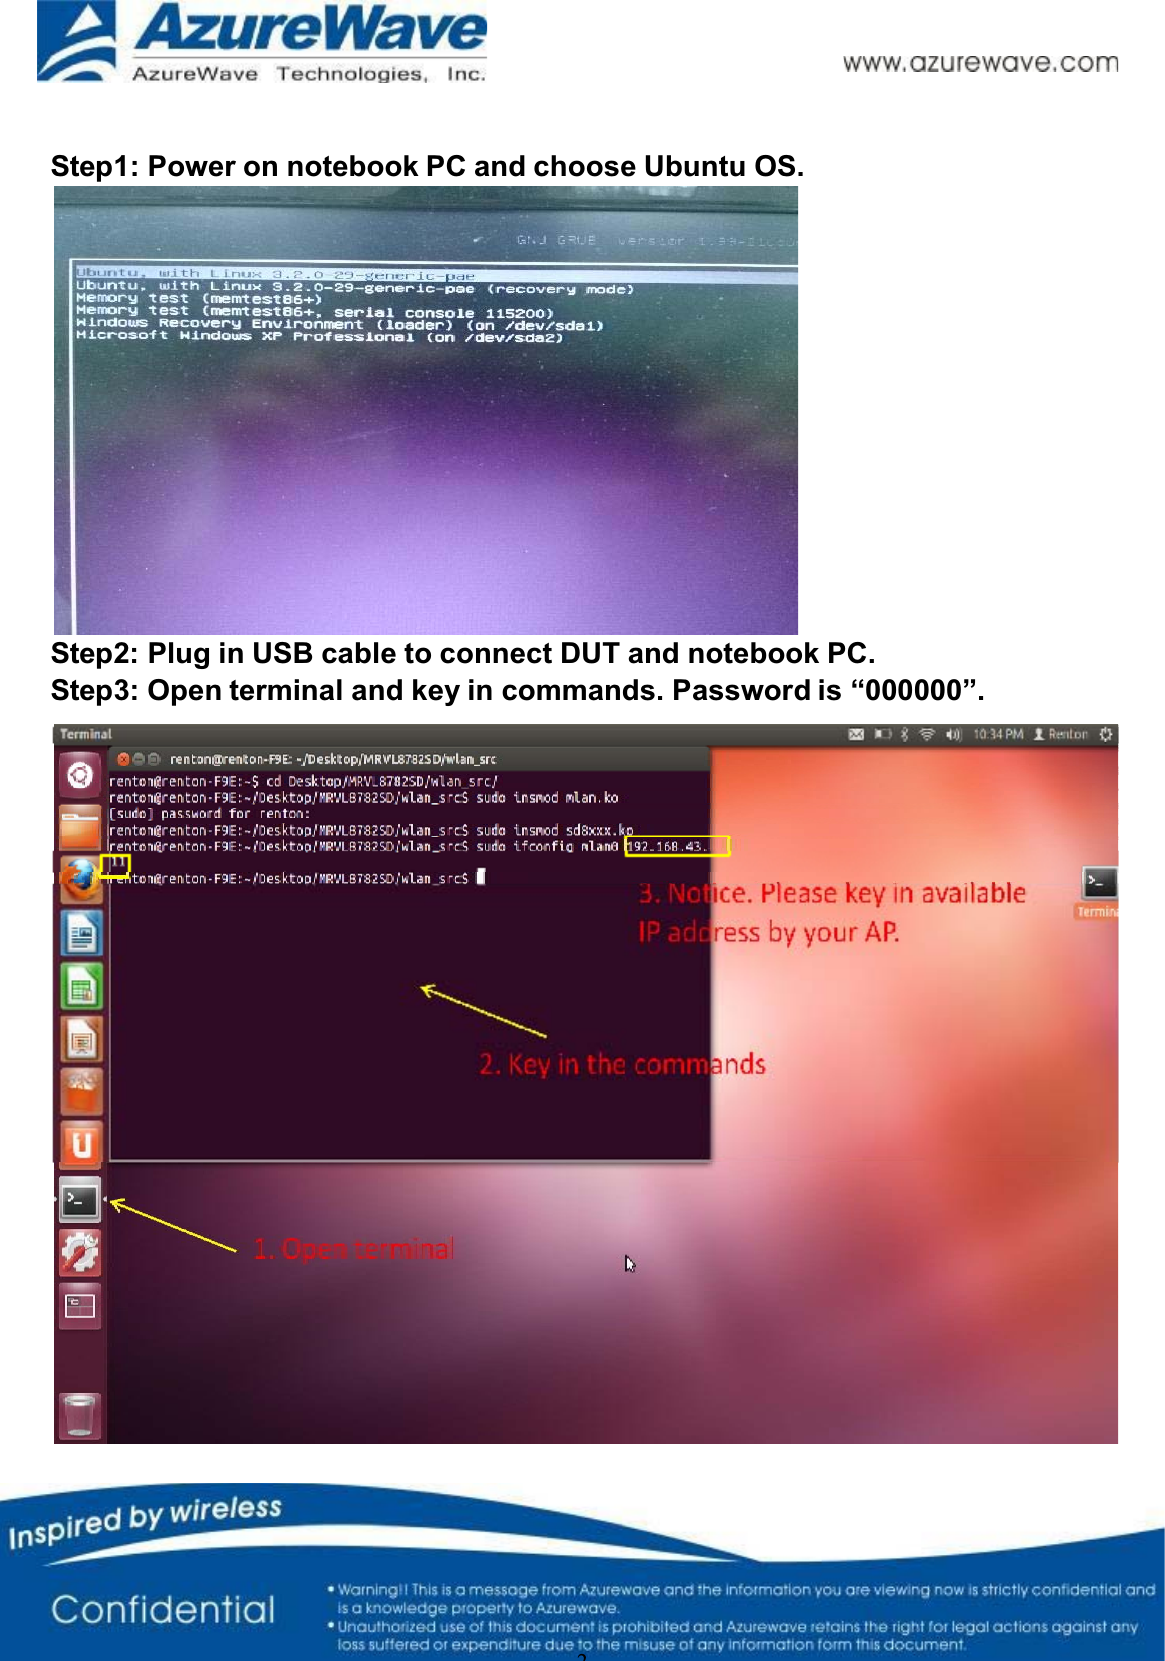 2Step1: Power on notebook PC and choose Ubuntu OS. Step2: Plug in USB cable to connect DUT and notebook PC. Step3: Open terminal and key in commands. Password is “000000”. 